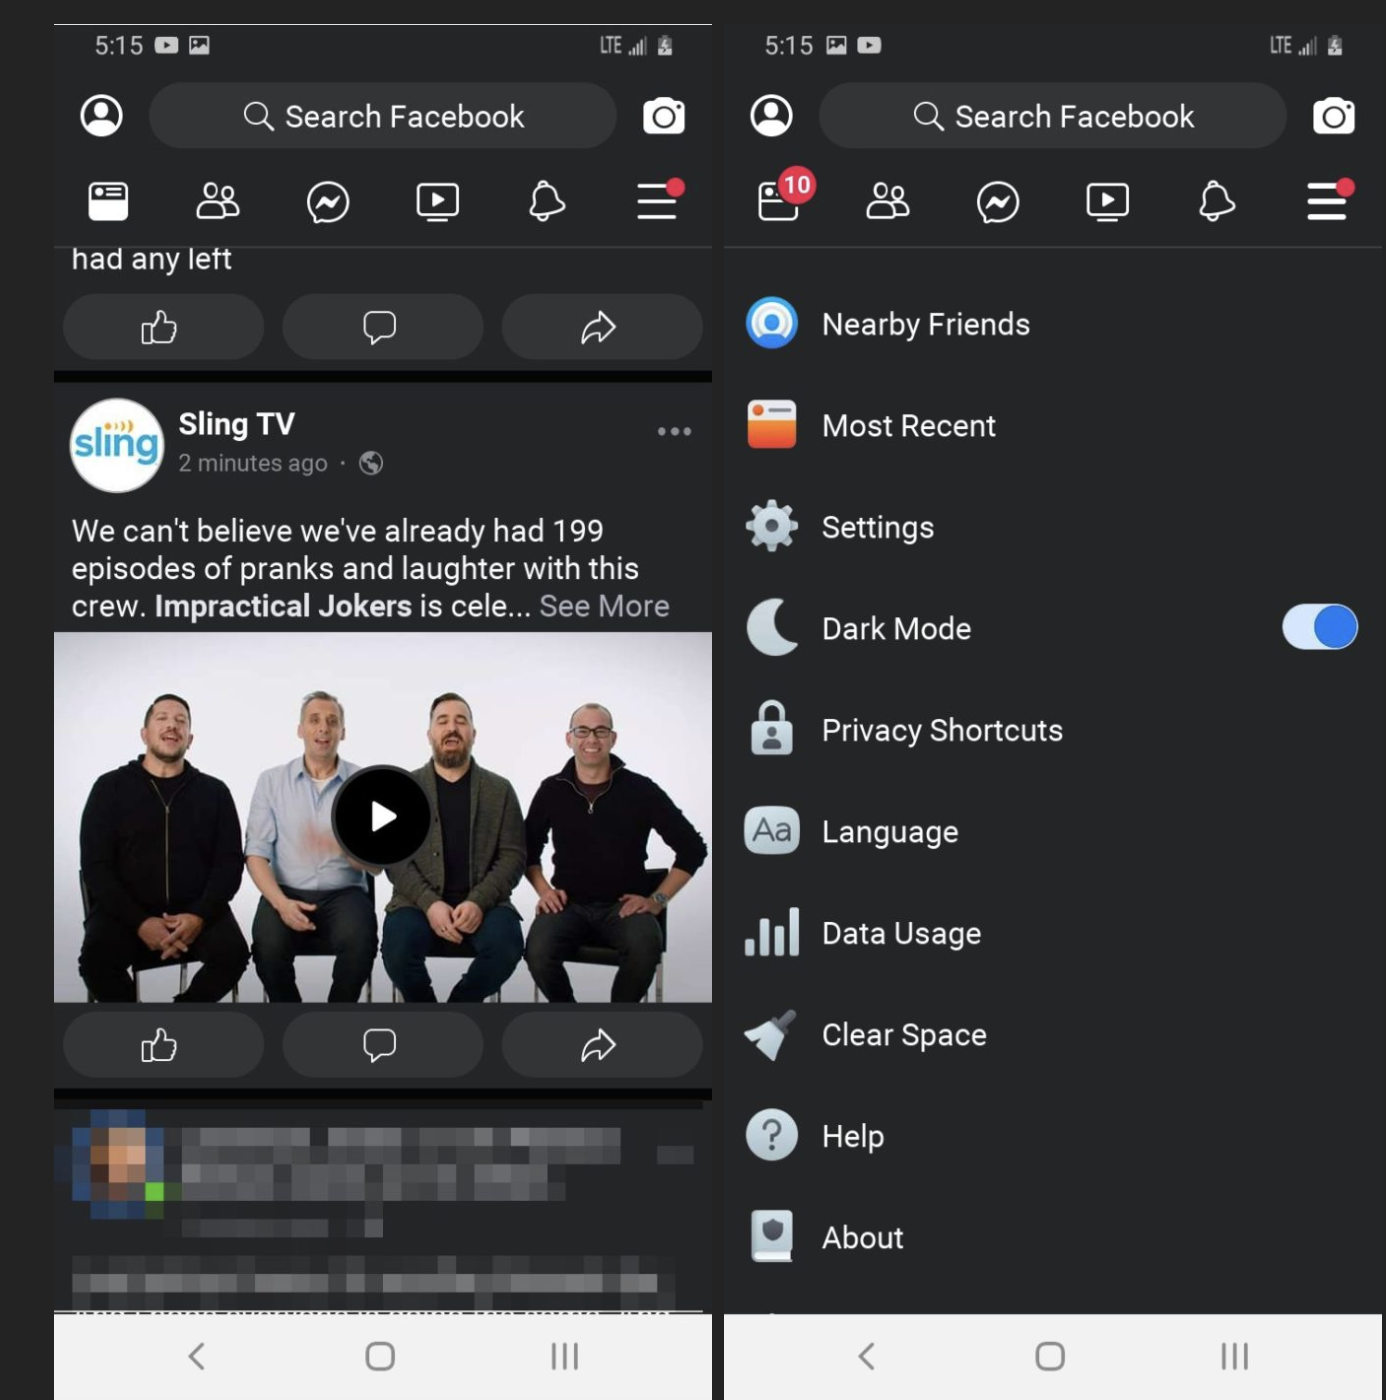 Facebook Lite Gives You Sneak Peek Into How Dark Mode Will Look On